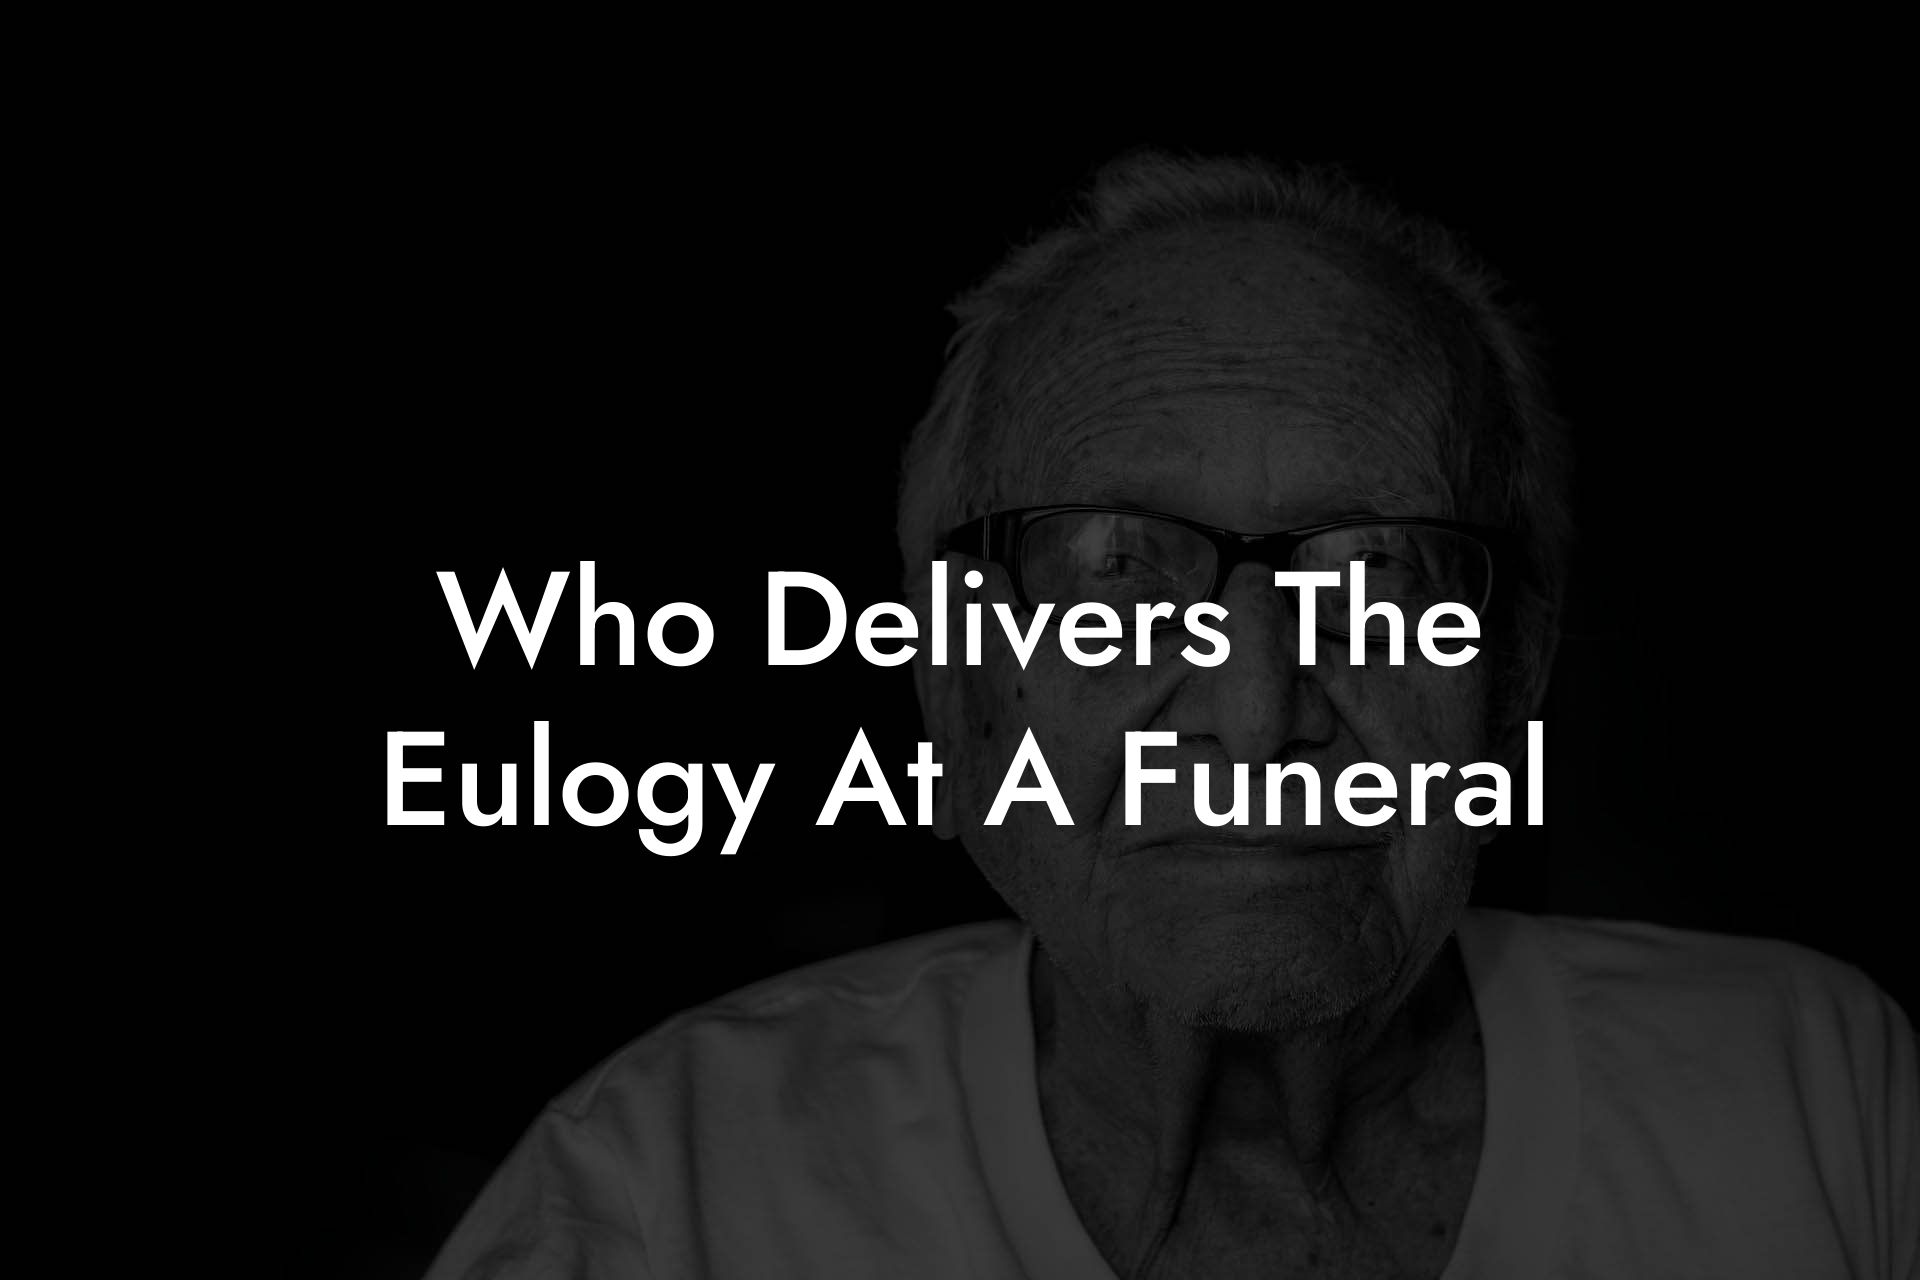 Who Delivers The Eulogy At A Funeral